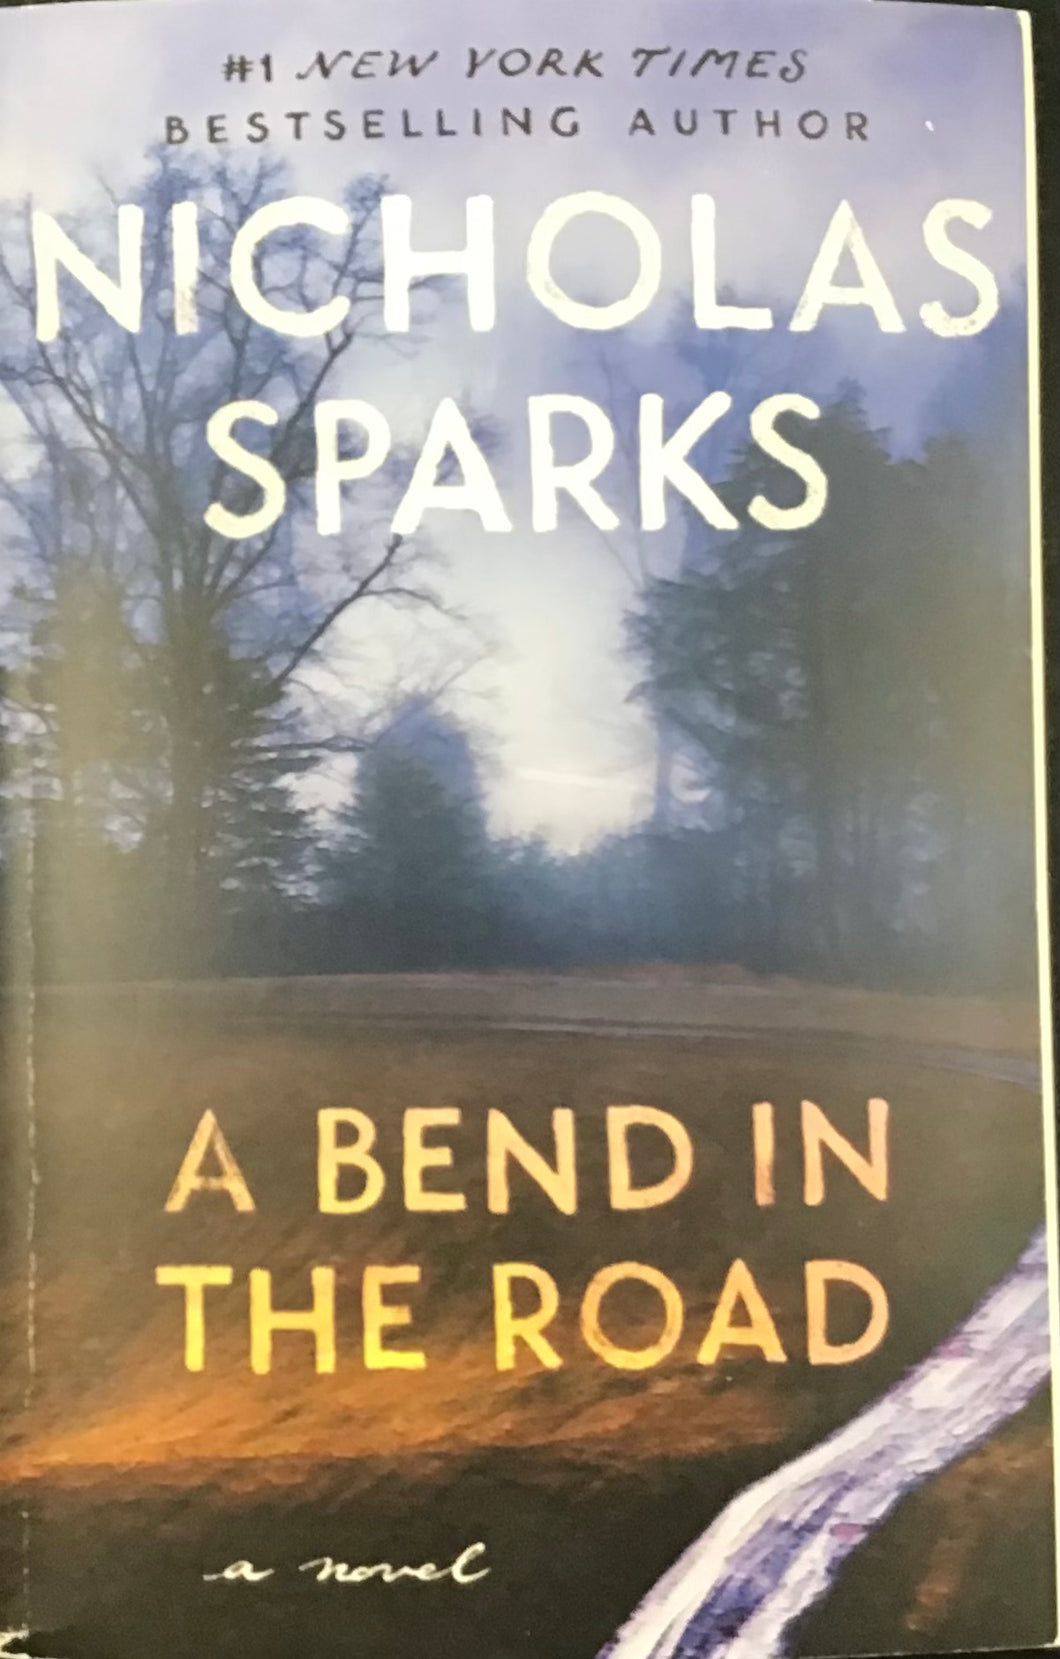 A Bend in The Road, Nicholas Sparks